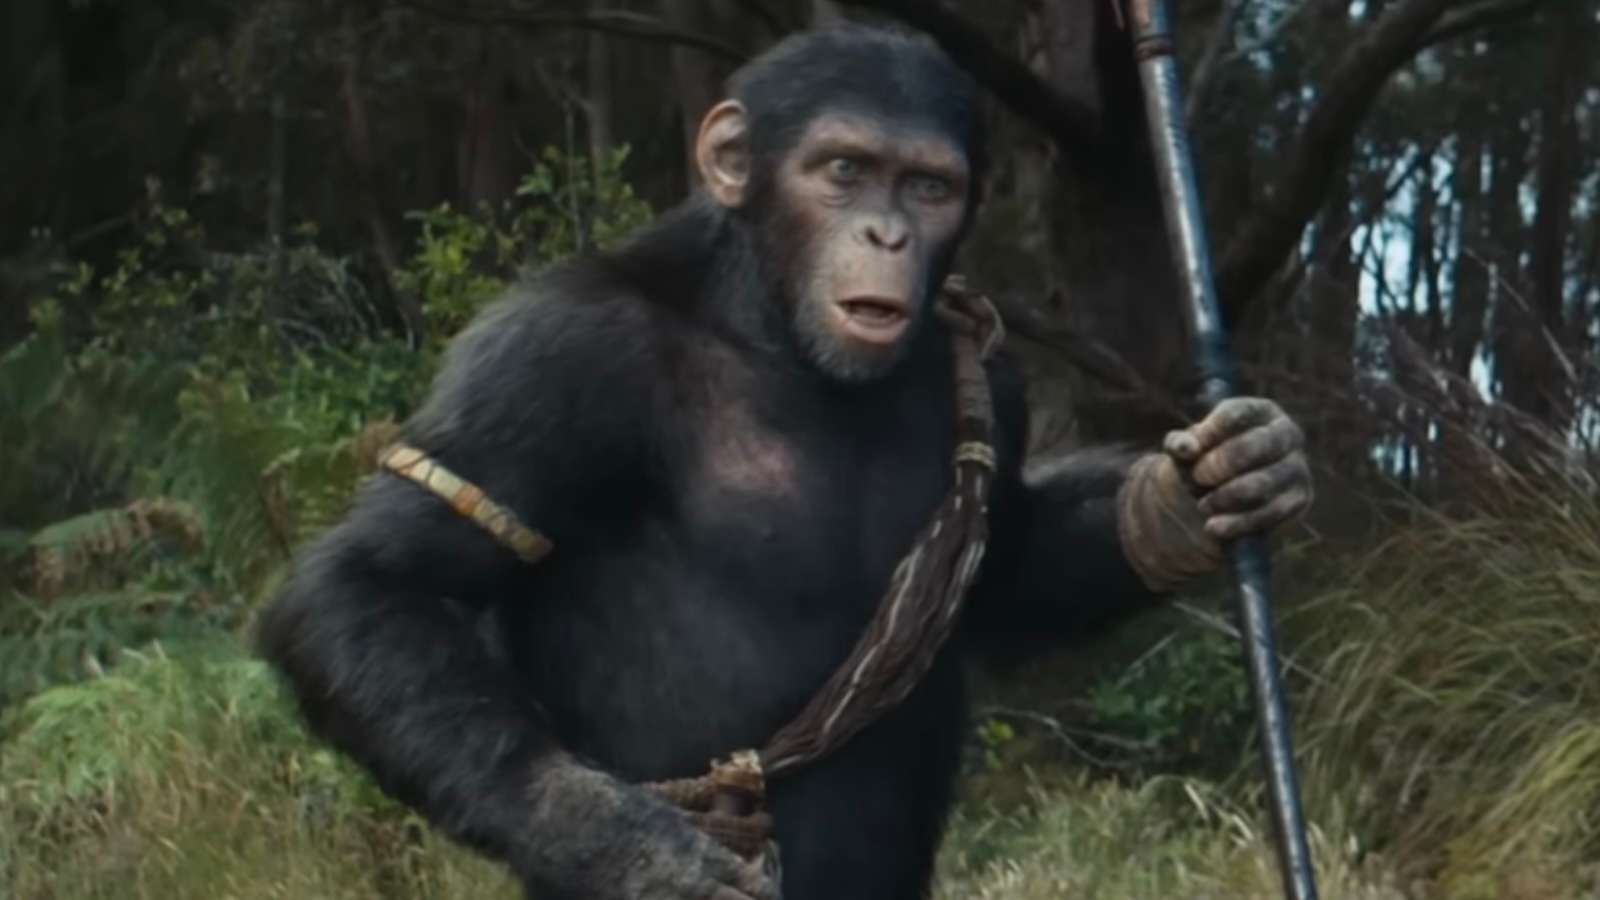 Owen Teague as Not in Kingdom of the Planet of the Apes